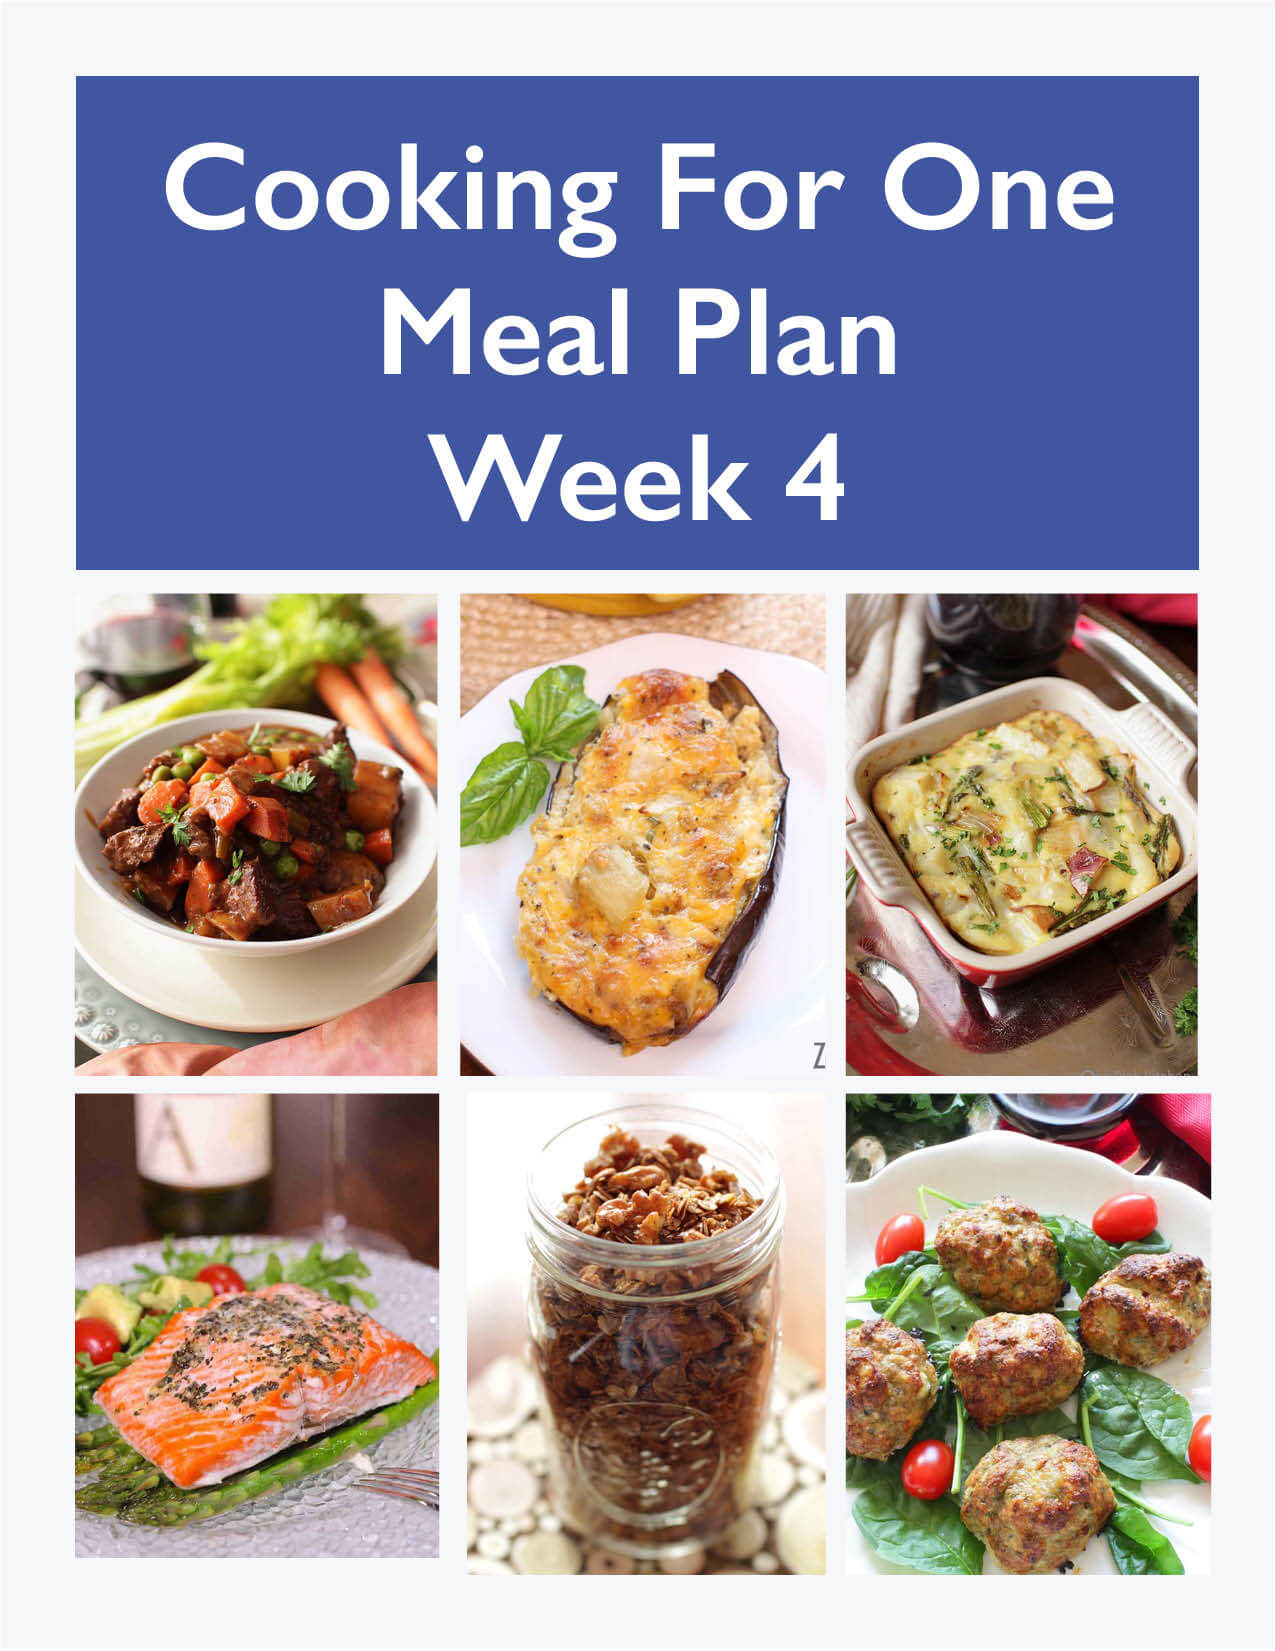 Promotional title page of the six Cooking For One Meal Plan Week Four dishes